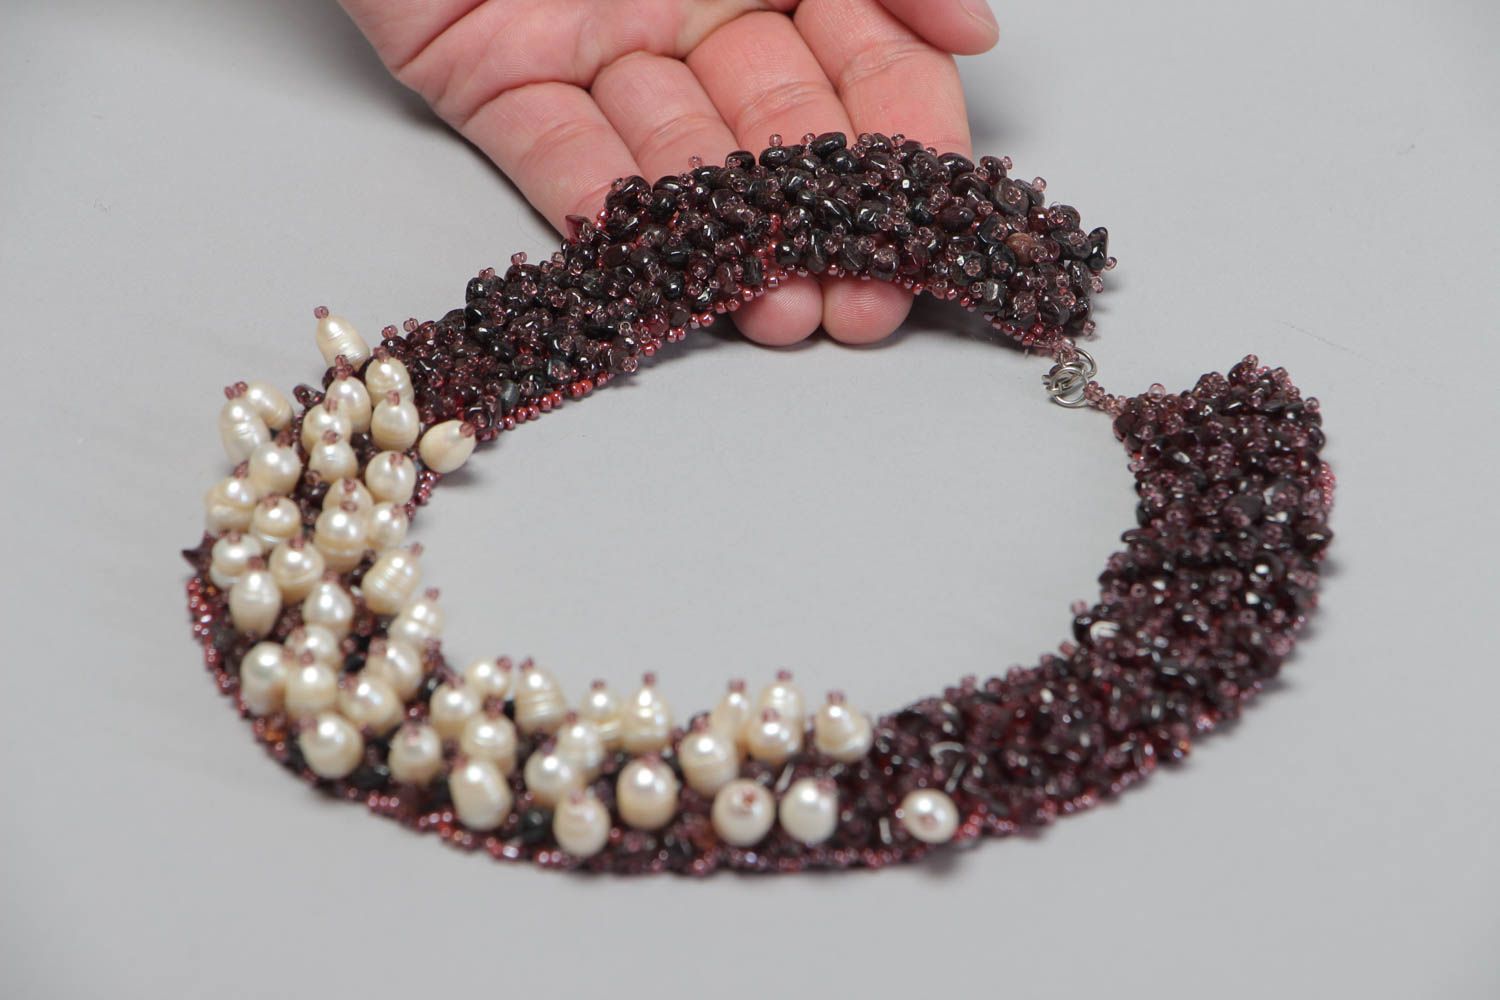 Handmade necklace accessories made of beads and river pearls cute jewelry photo 5